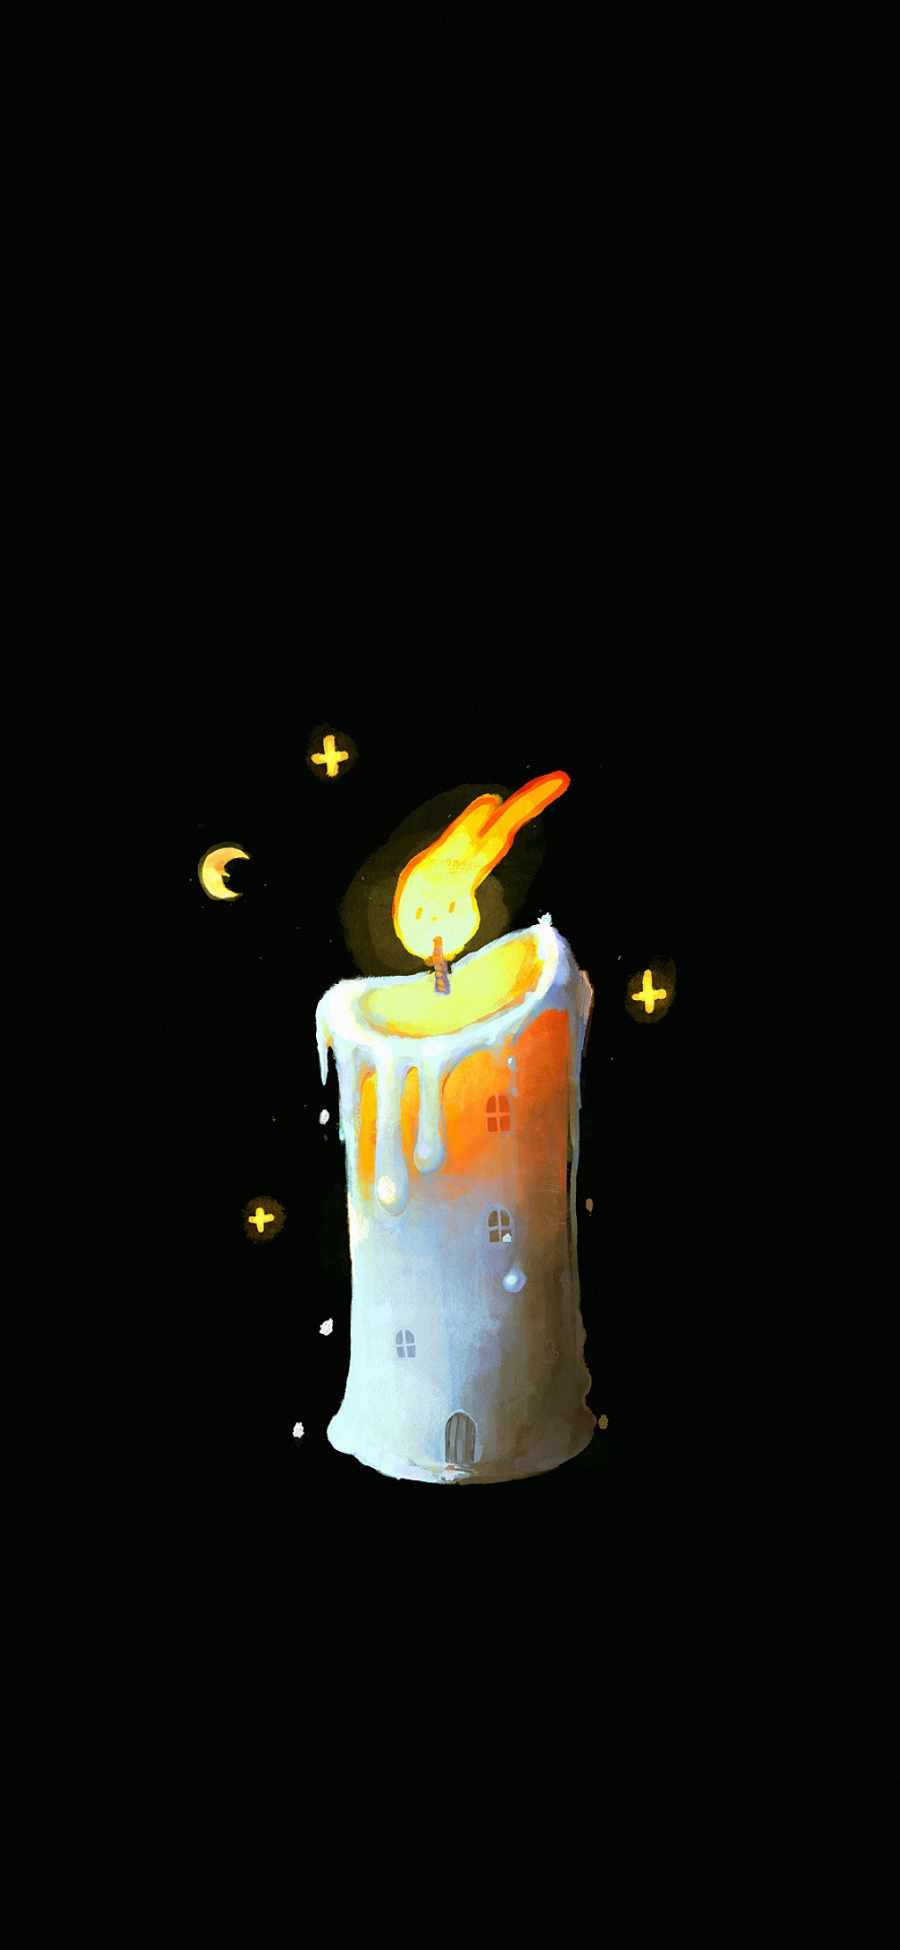 Night Candle HD IPhone Wallpaper - IPhone Wallpapers : iPhone Wallpapers